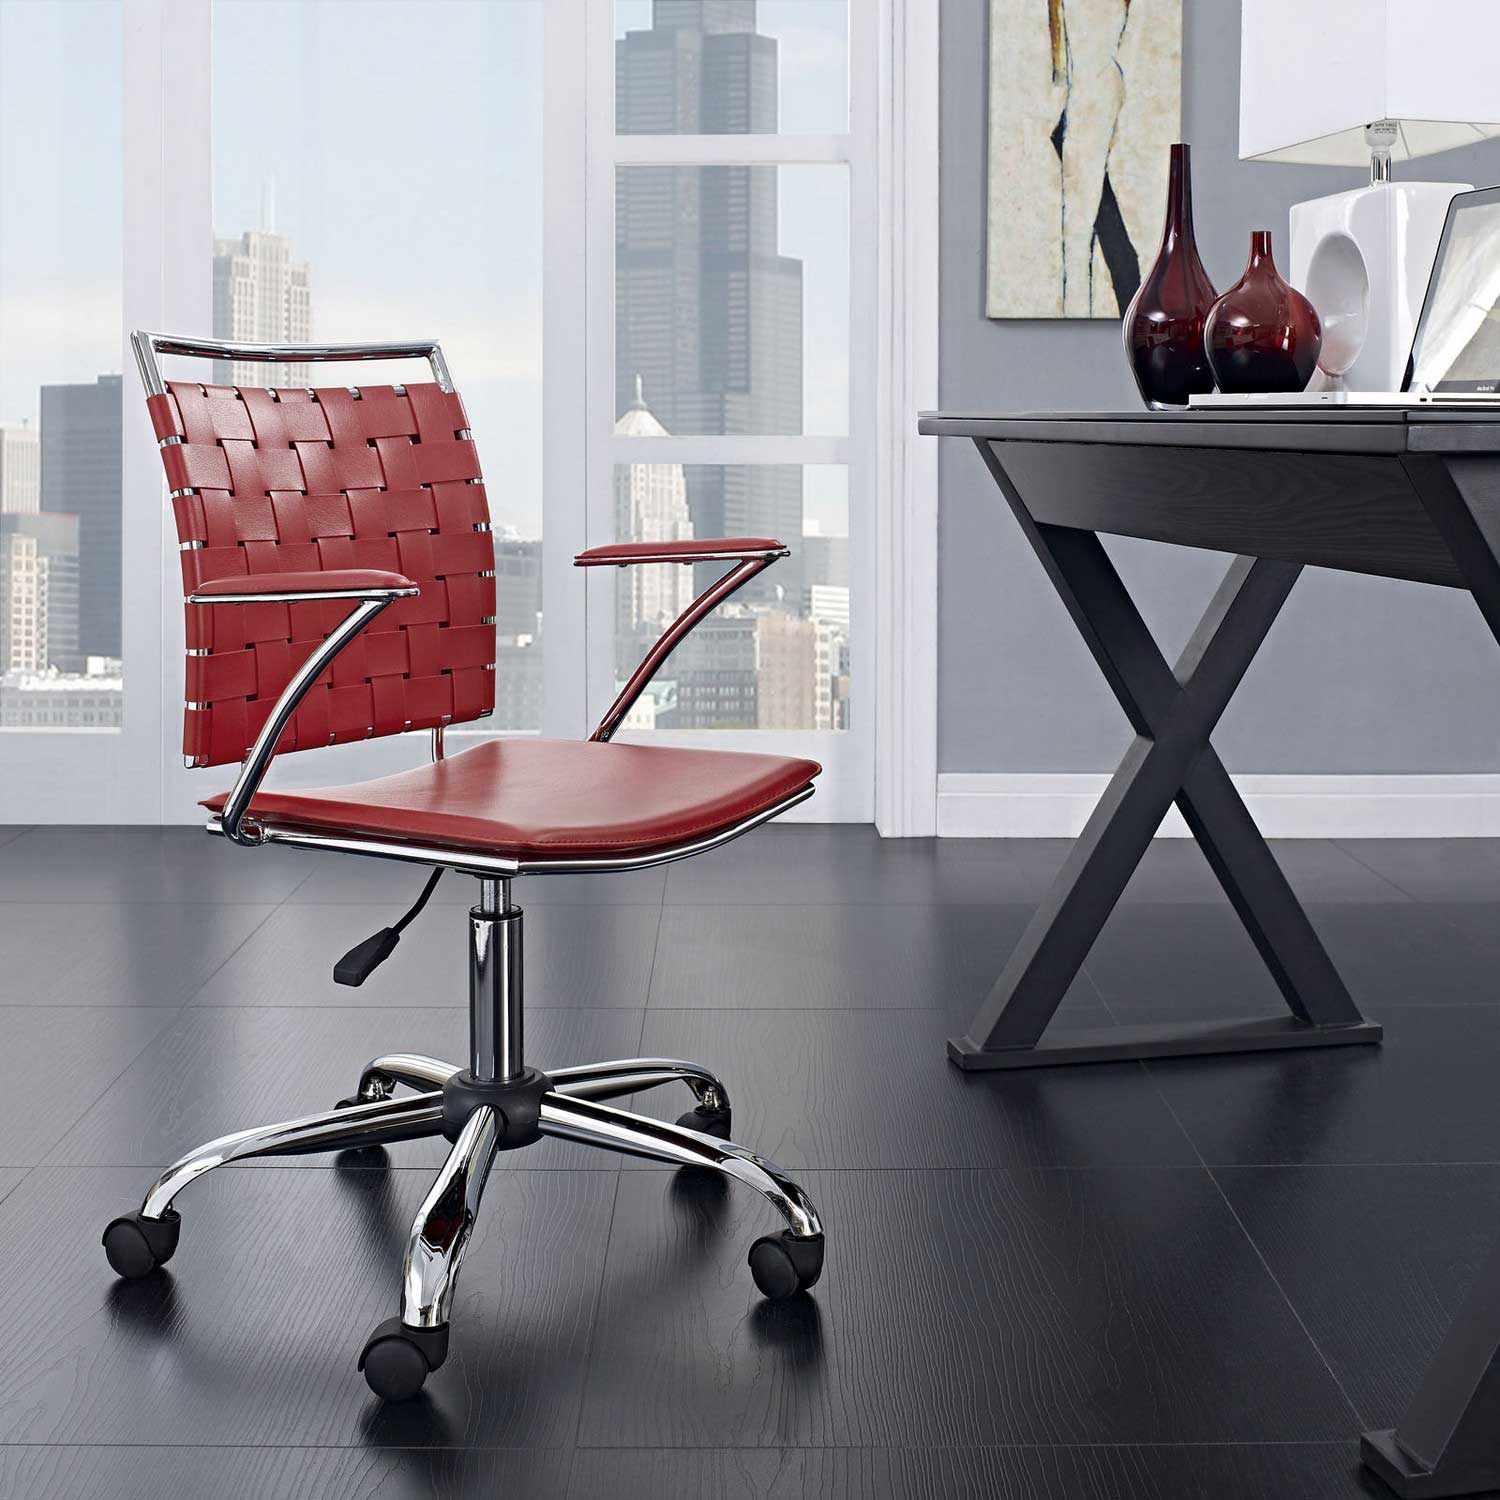 Modway Fuse Office Chair - Red